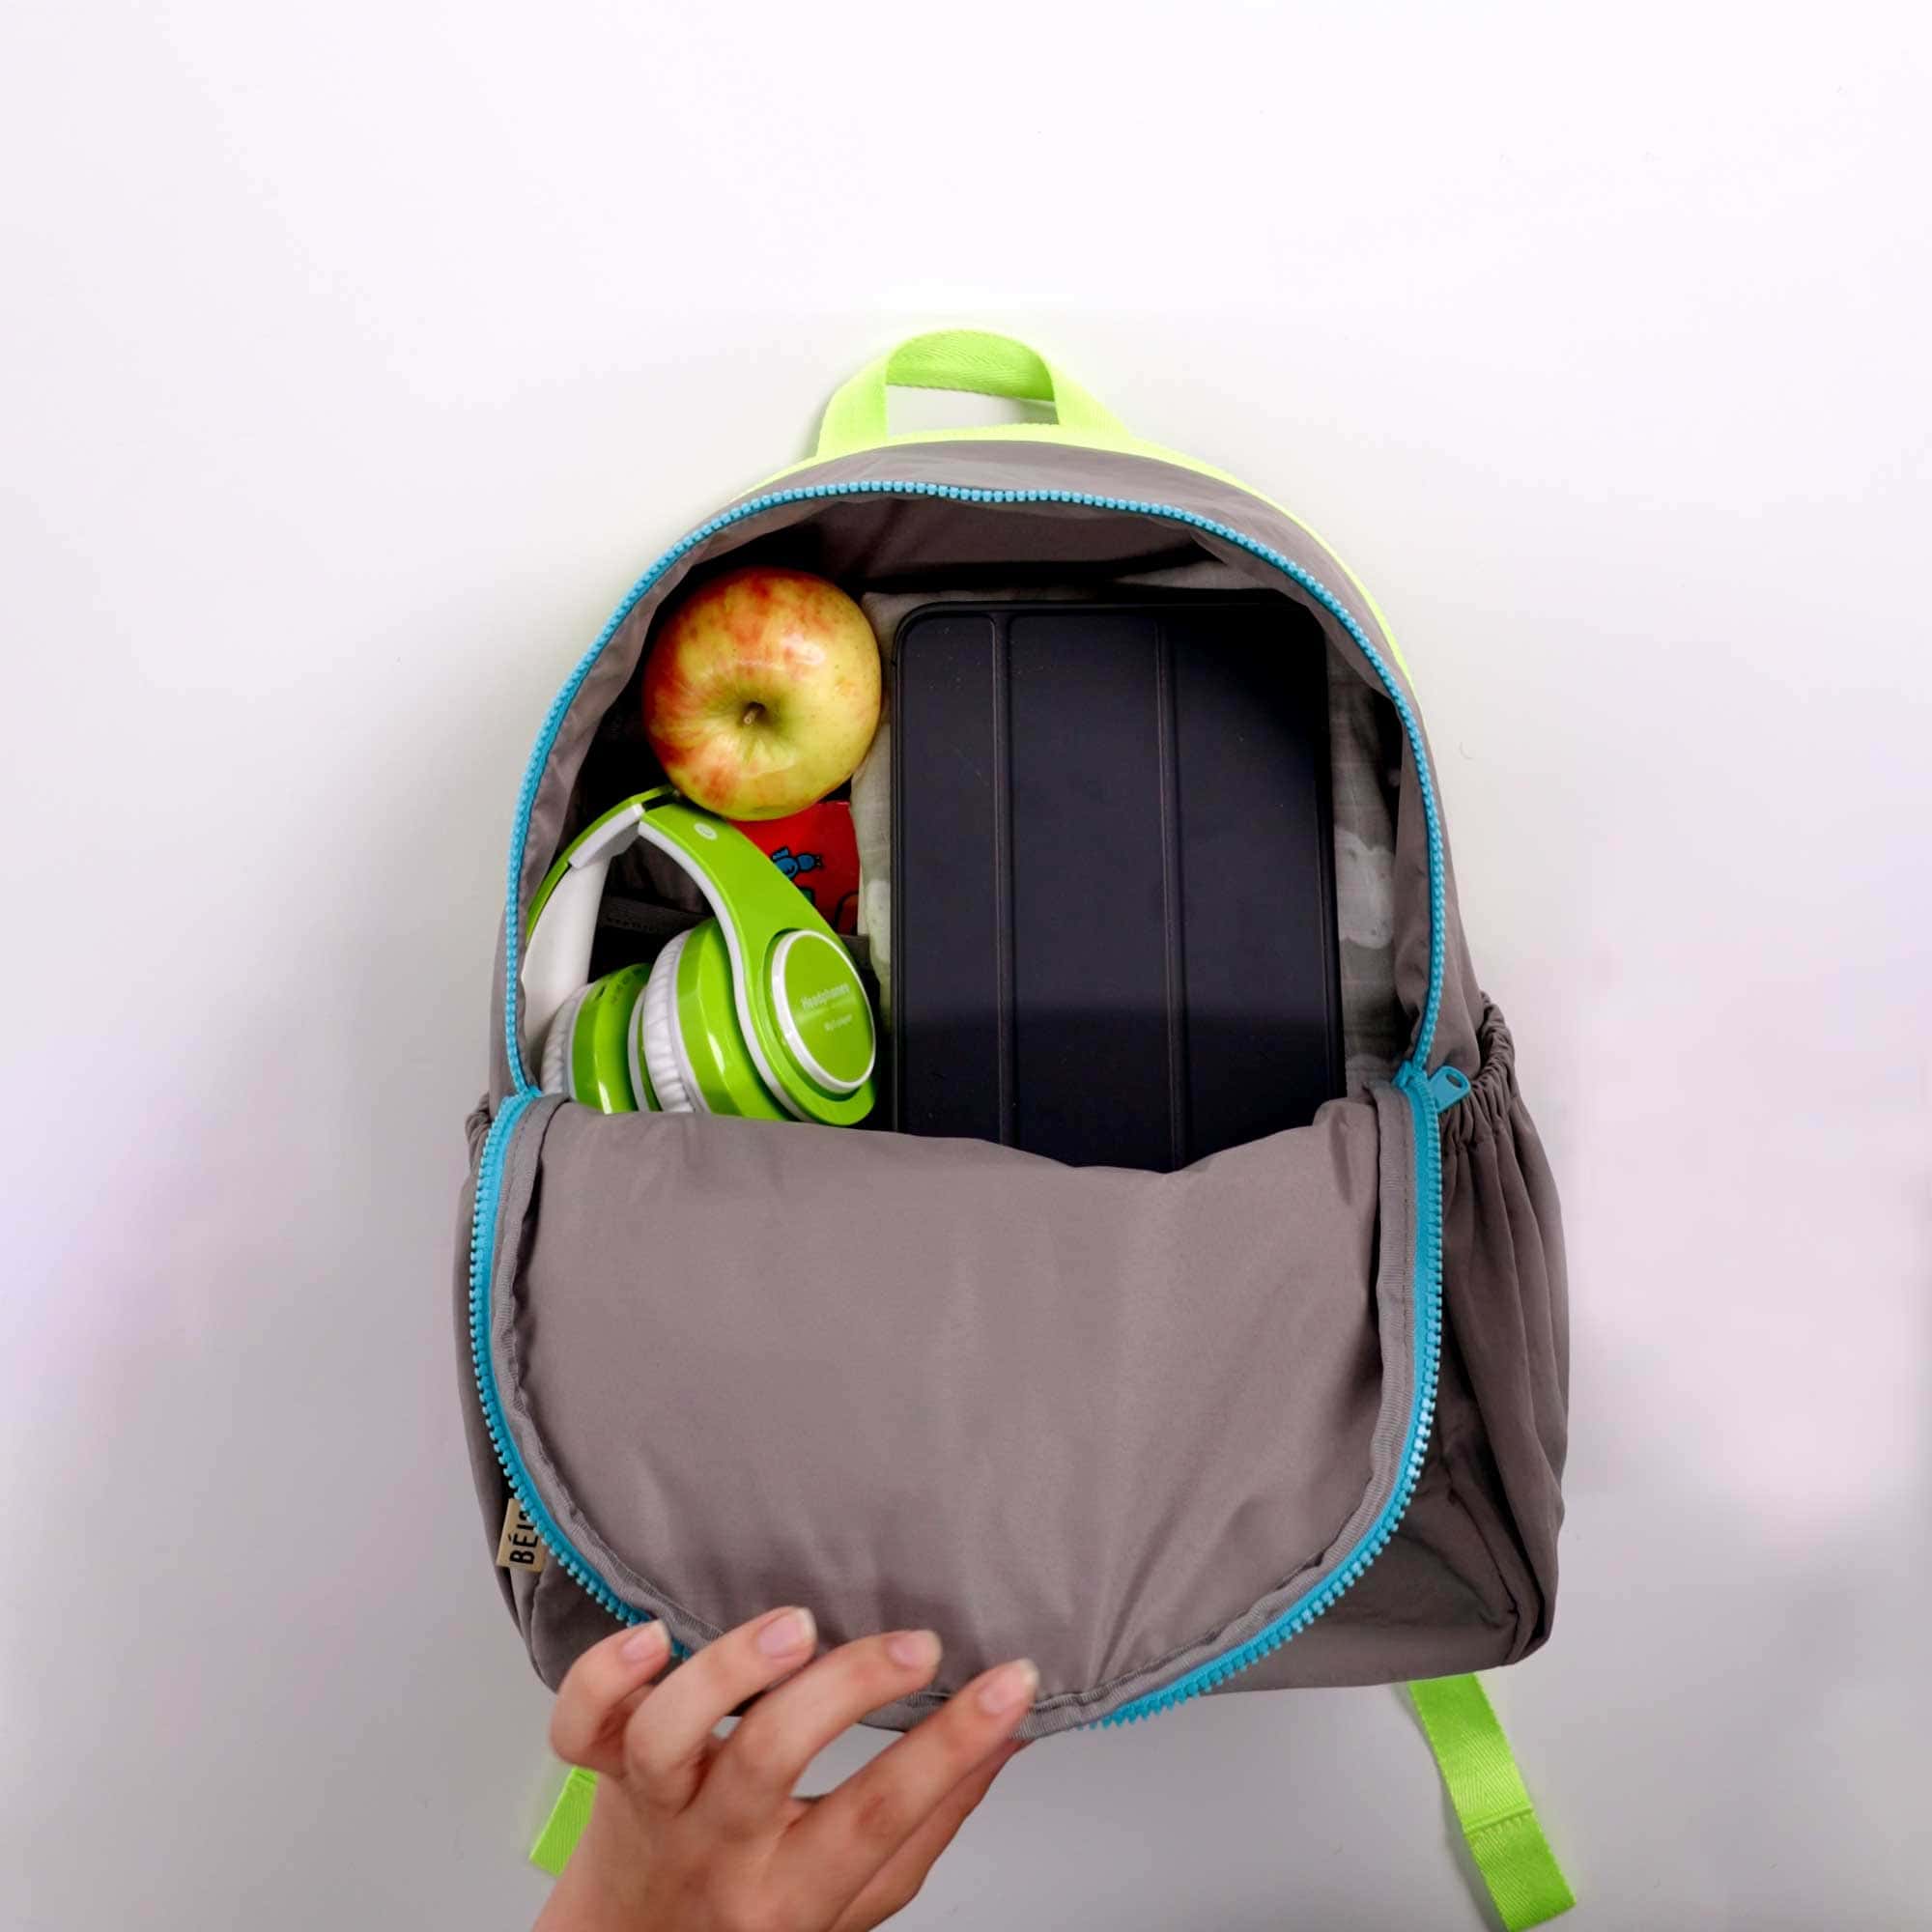 Béis 'The Kids Backpack' in Grey - Cool Travel Backpacks for Kids in Grey